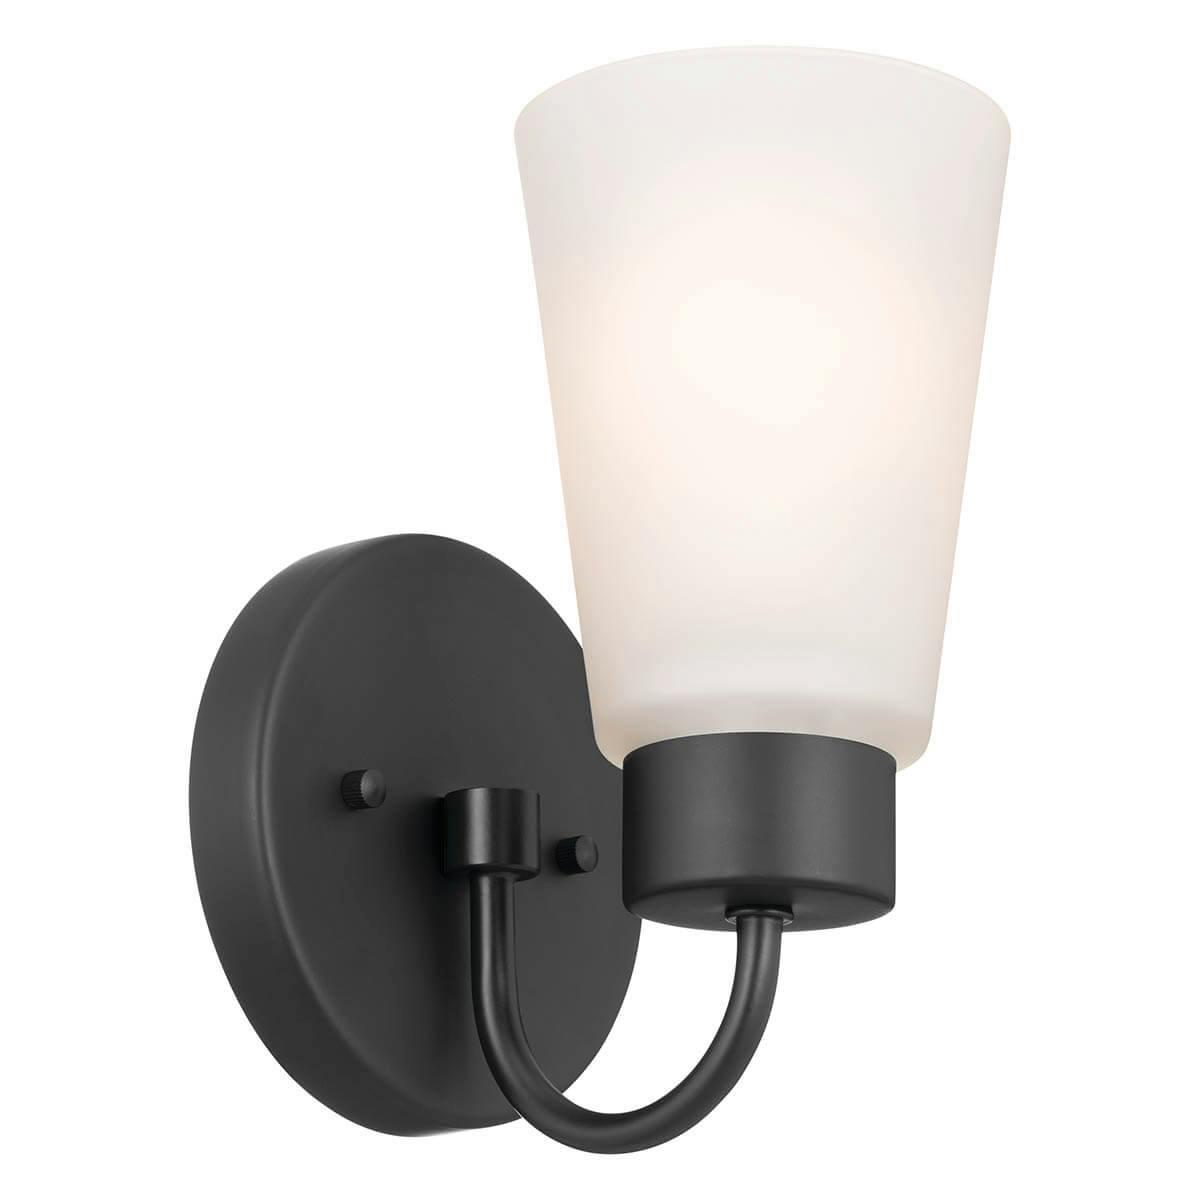 The Erma 4.25" 1 Light Wall Sconce Black facing up on a white background